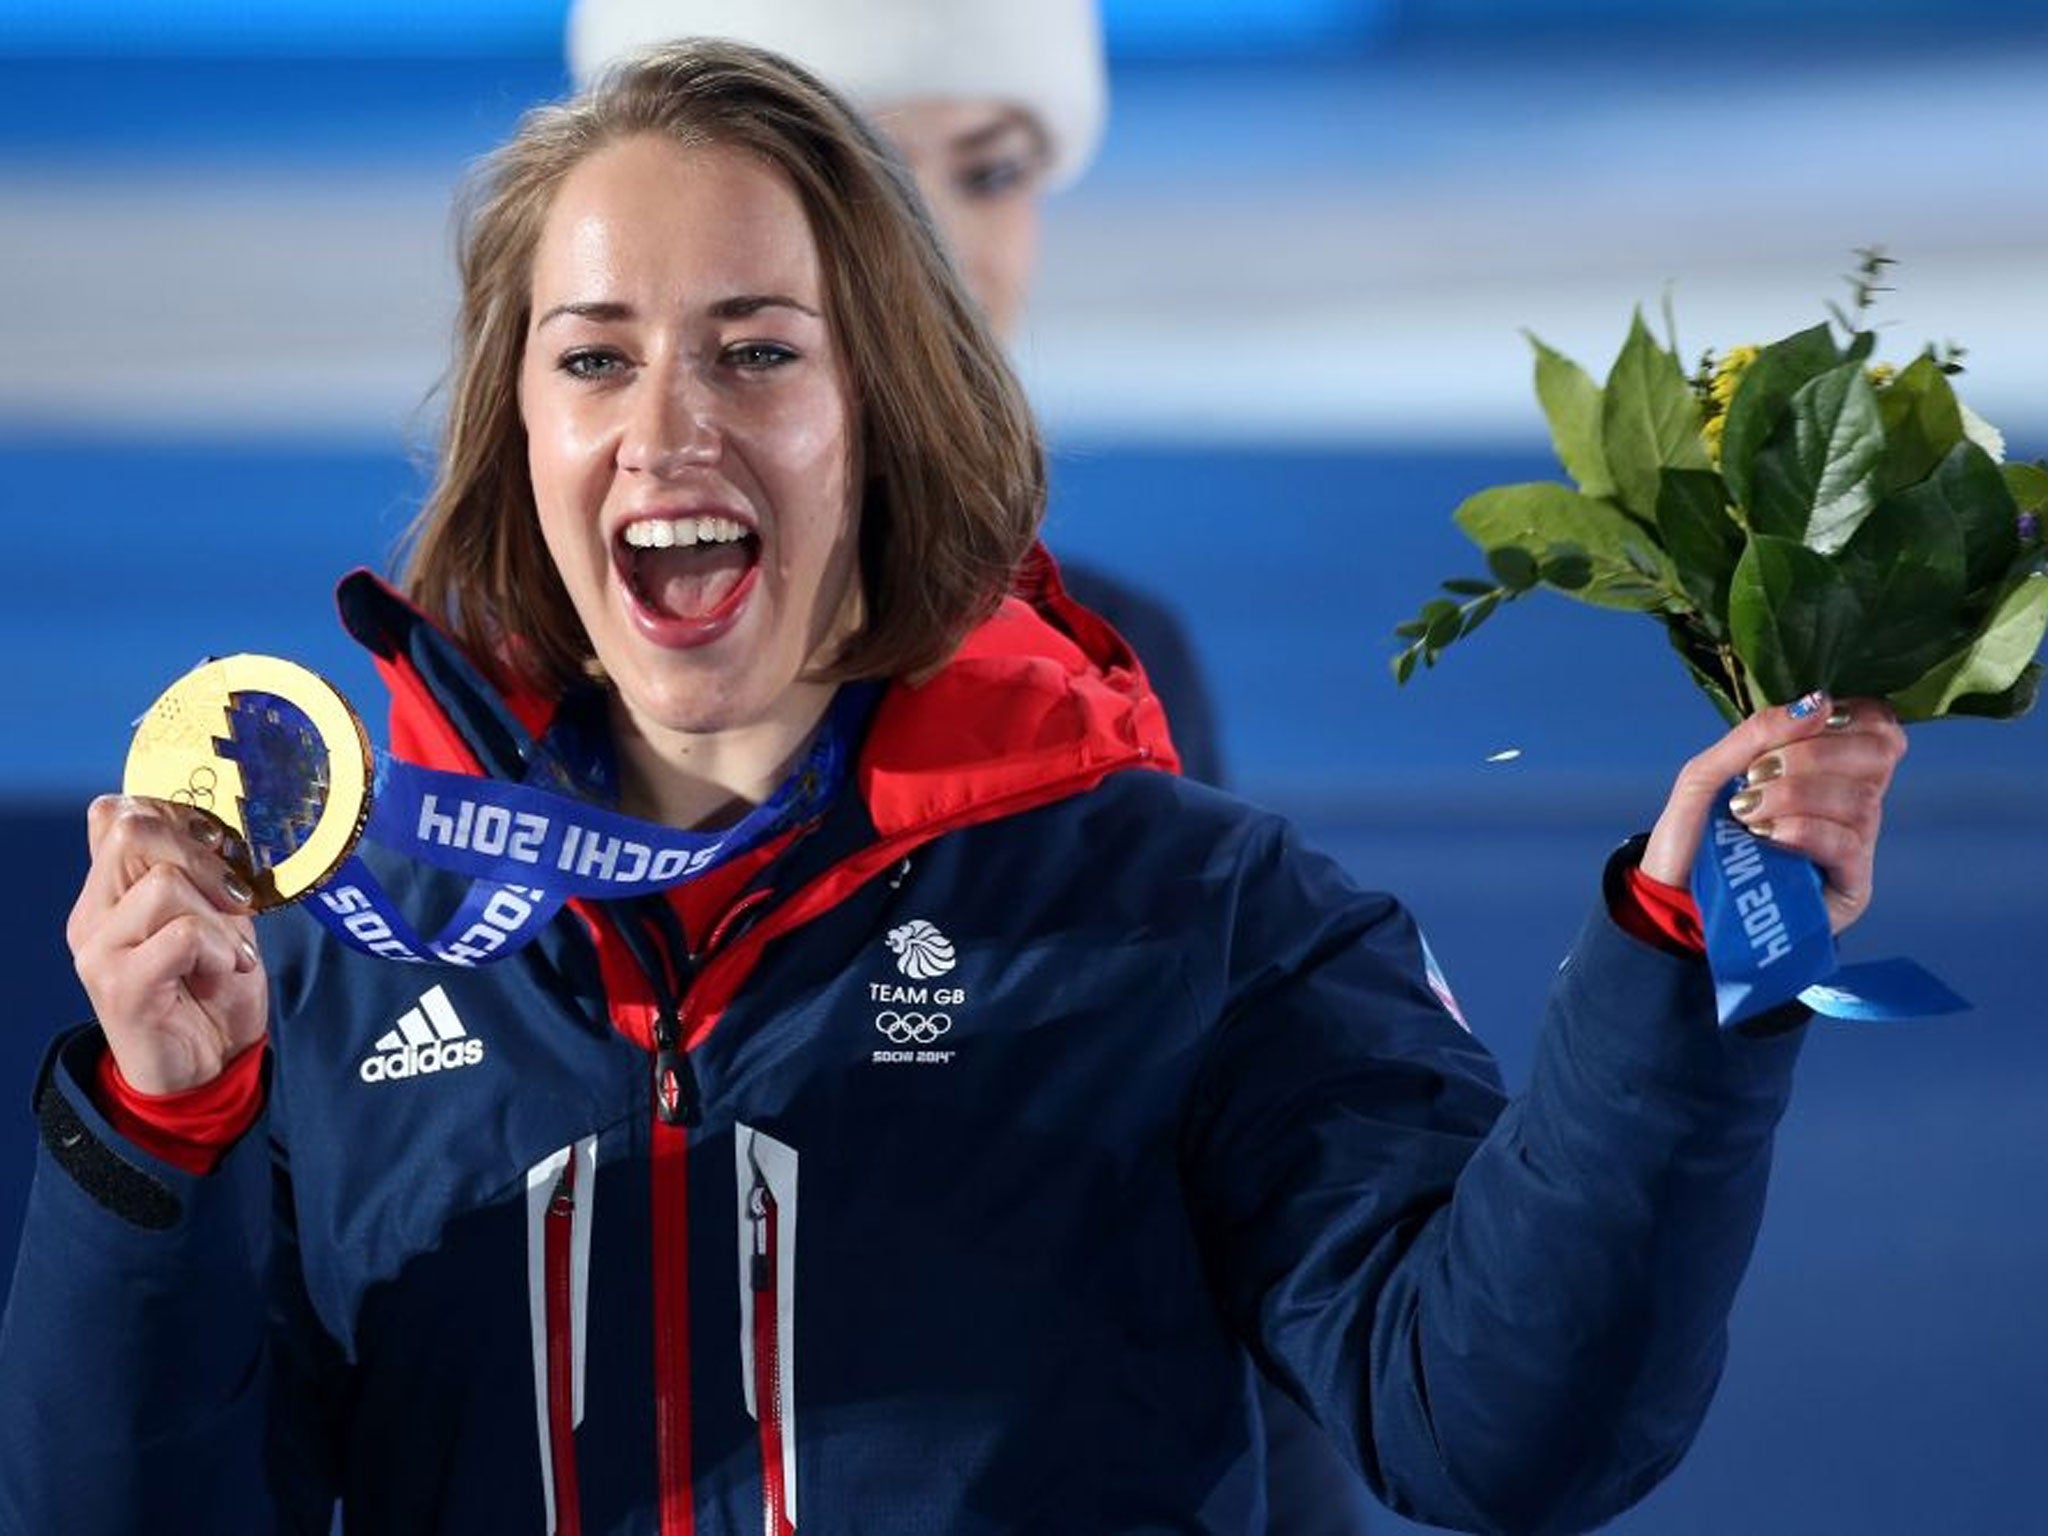 Lizzie Yarnold with the Gold medal she won in the Women's Skeleton, during the Medal Ceremony at the Medals Plaza, at the 2014 Sochi Olympic Games in Sochi, Russia.